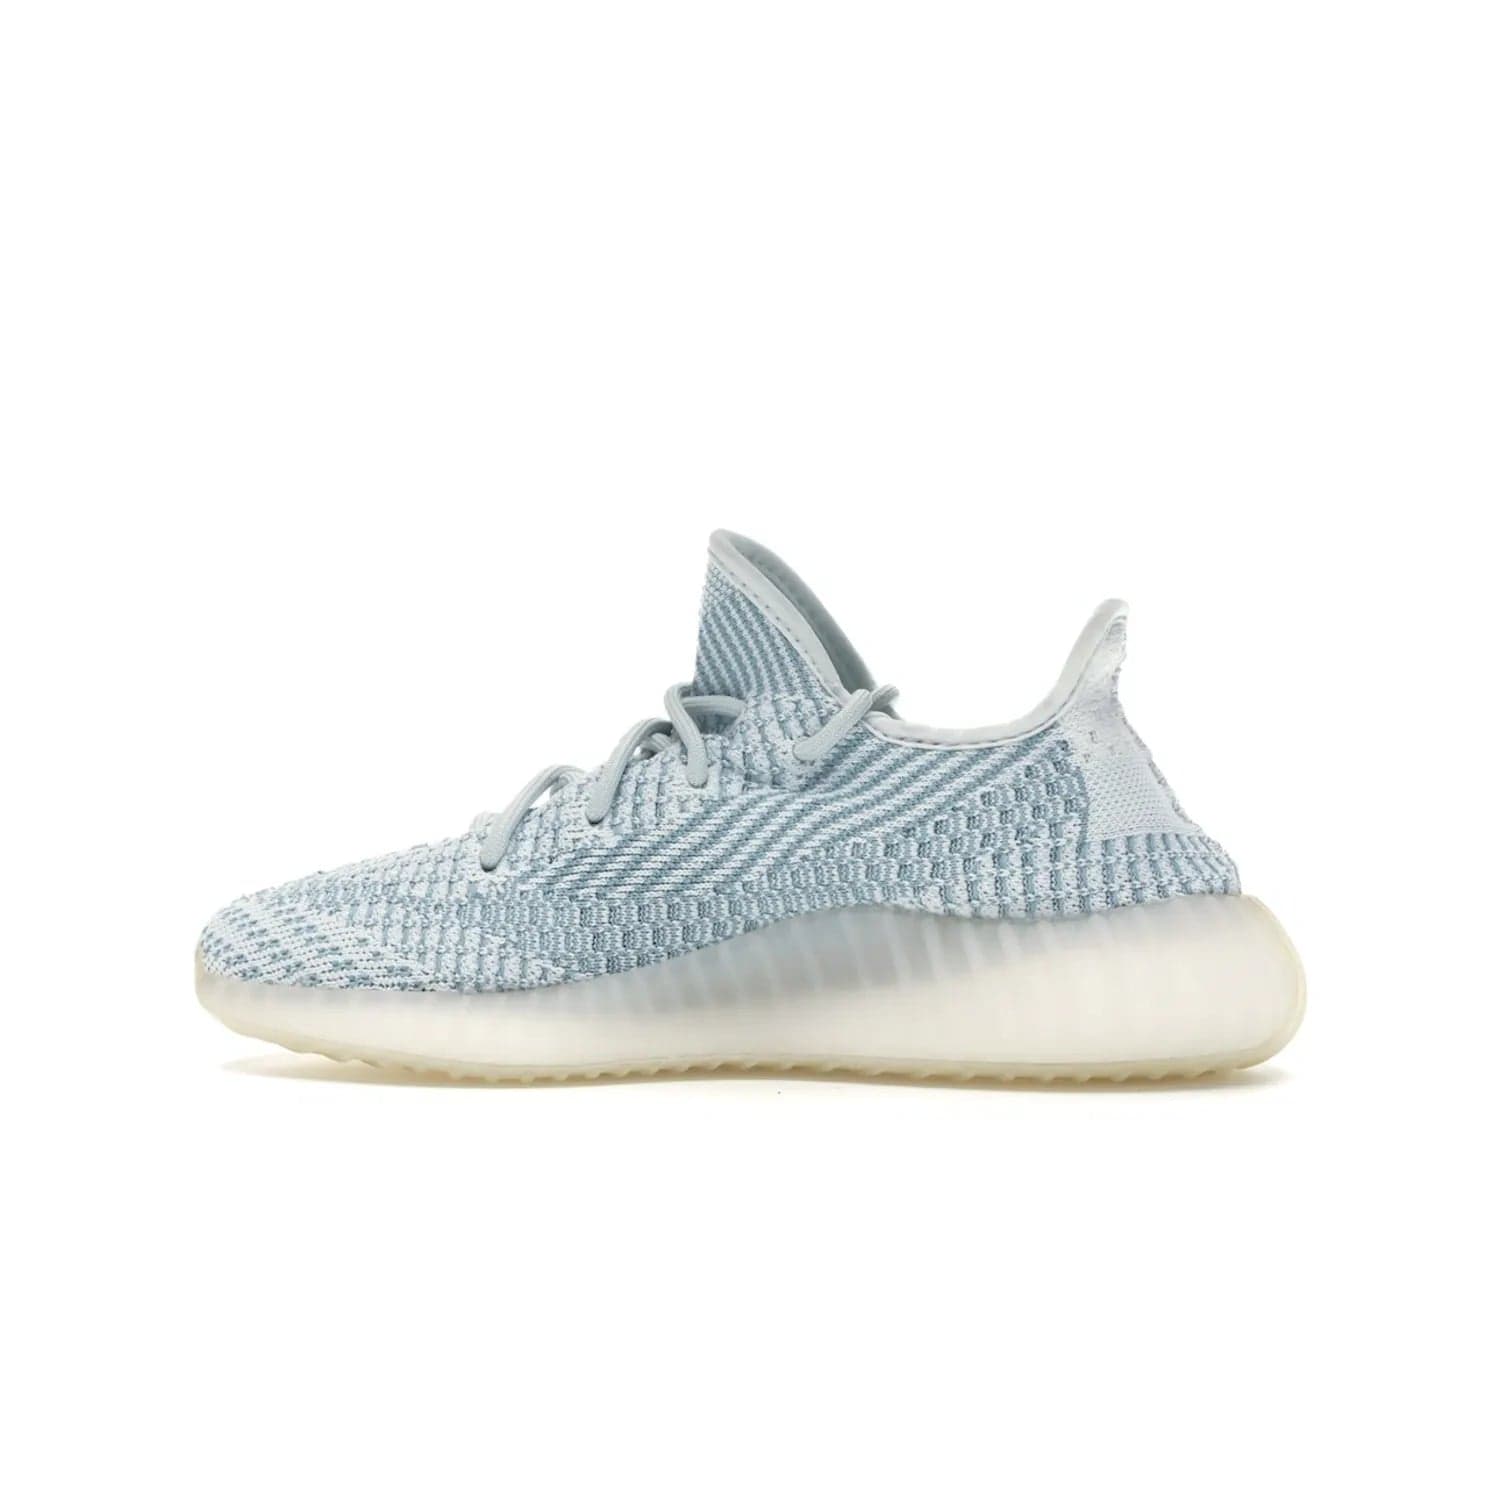 adidas Yeezy Boost 350 V2 Cloud White (Non-Reflective) - Image 20 - Only at www.BallersClubKickz.com - Uniquely designed adidas Yeezy Boost 350 V2 Cloud White (Non-Reflective) with a Primeknit upper in shades of cream and blue with a contrasting hard sole. A fashion-forward sneaker with a transparent strip and blue-and-white patterns.